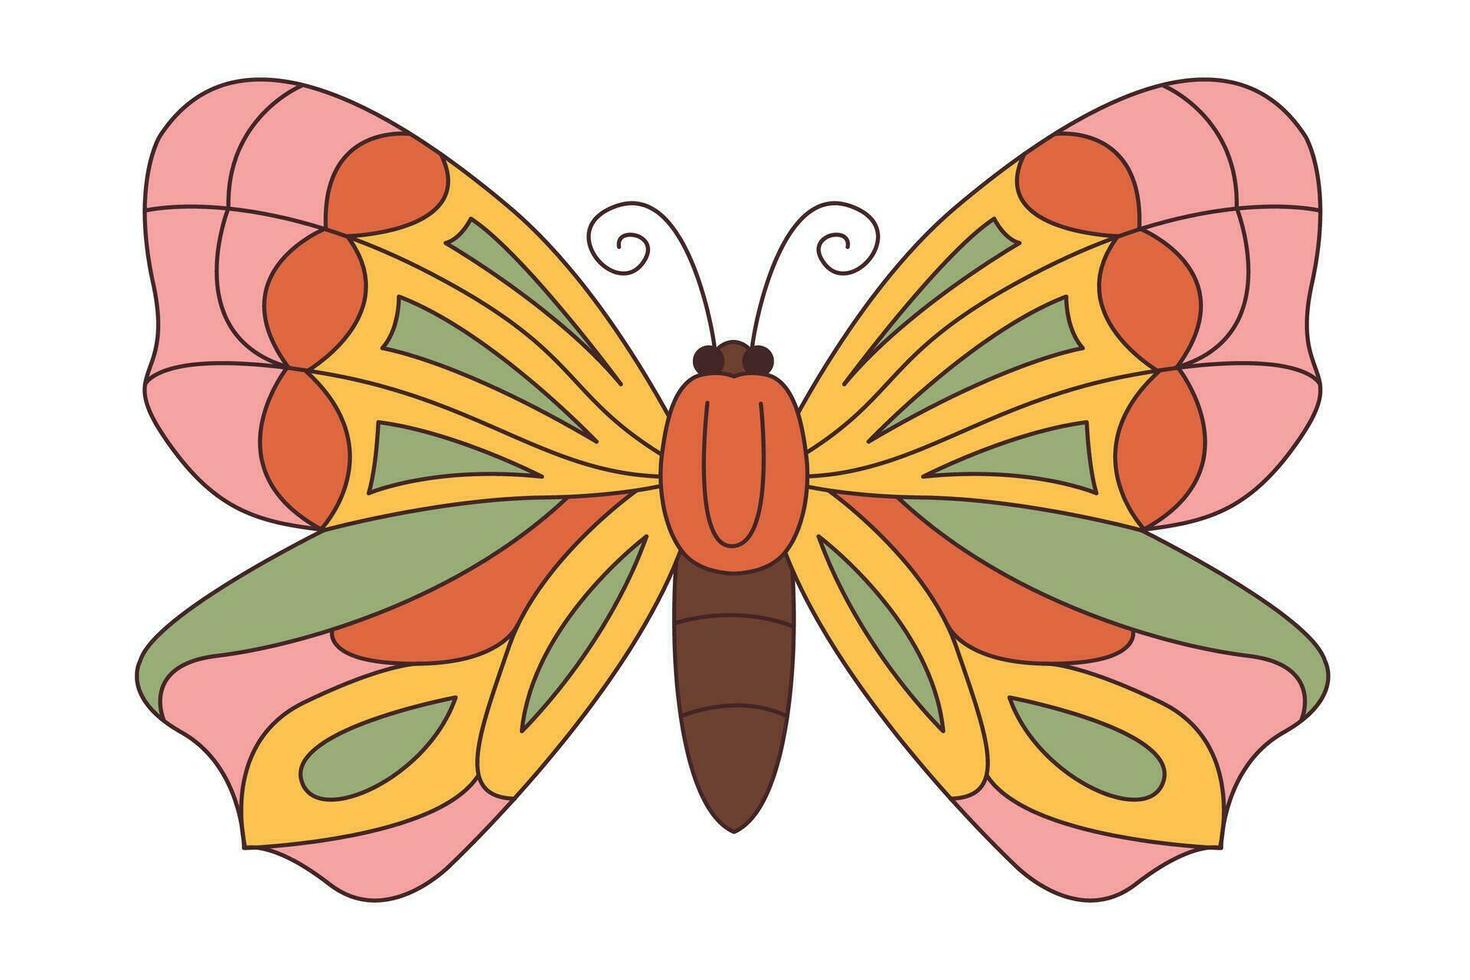 Groovy butterfly. Hippie 60s 70s retro style. Yellow, pink green colors. vector